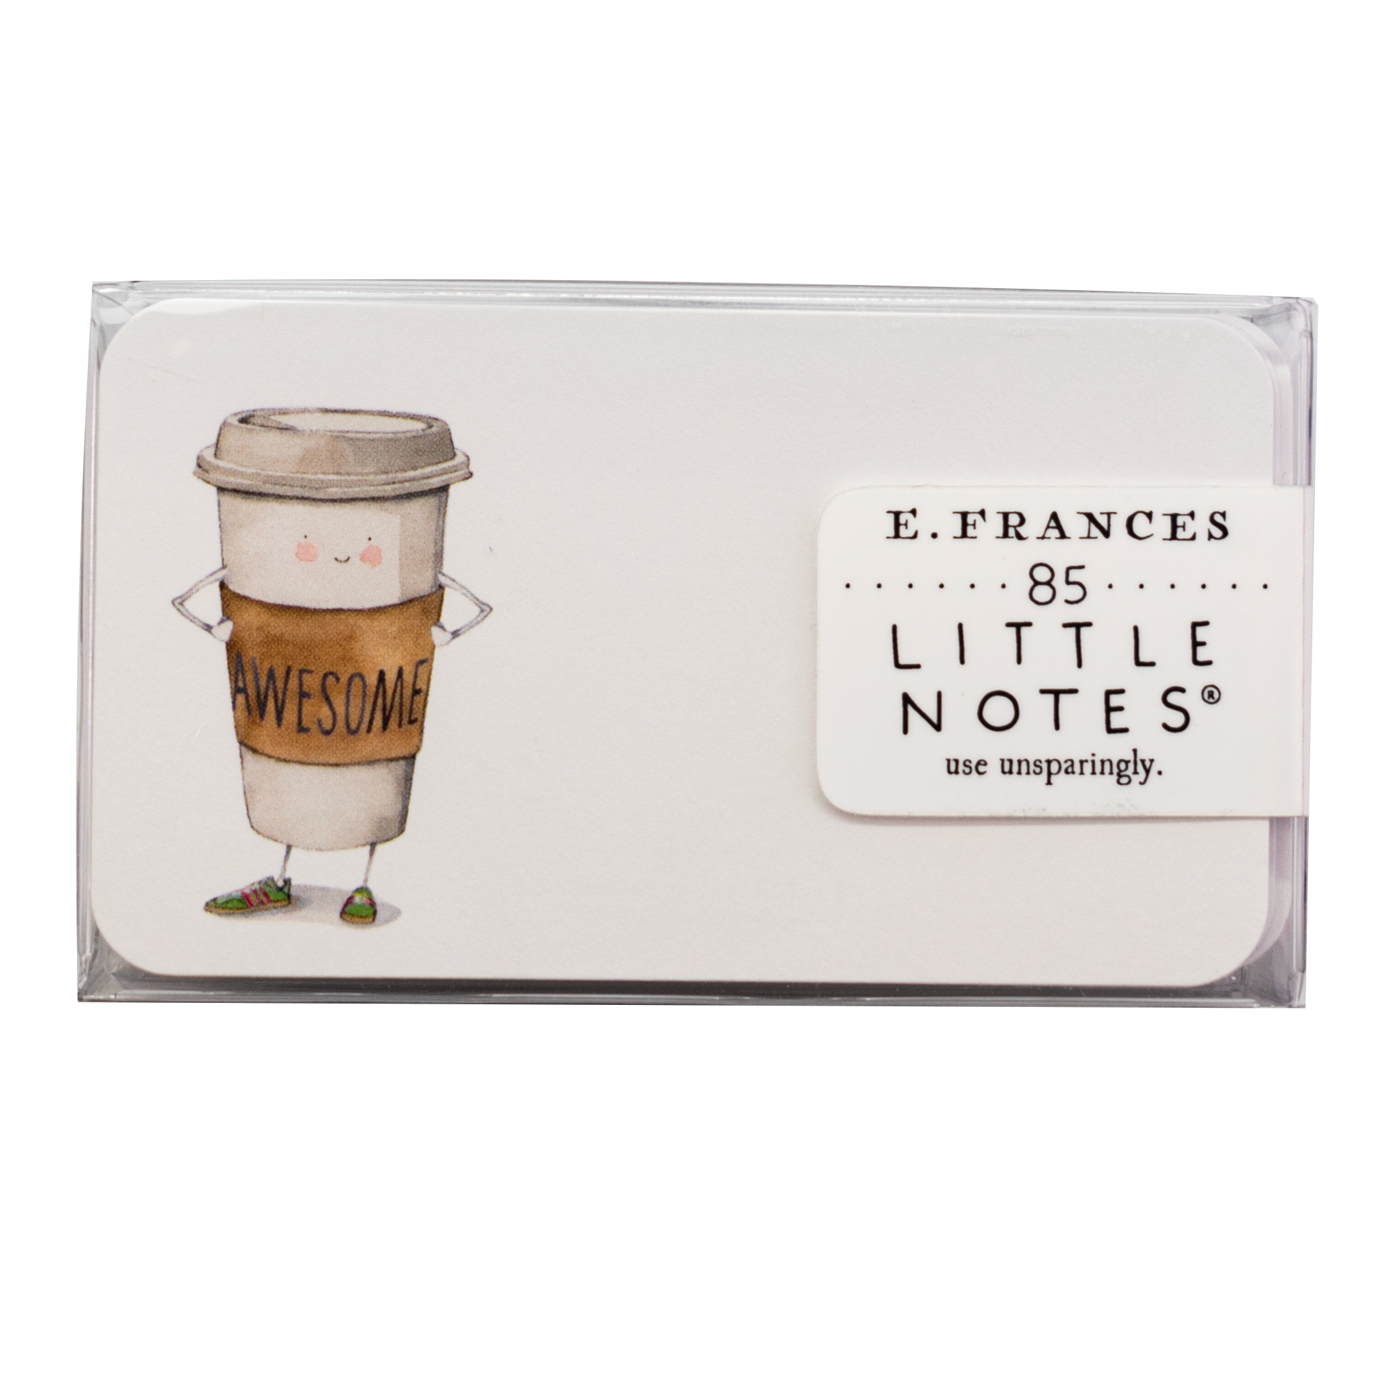 E. Frances Little Notes - Awesome Coffee